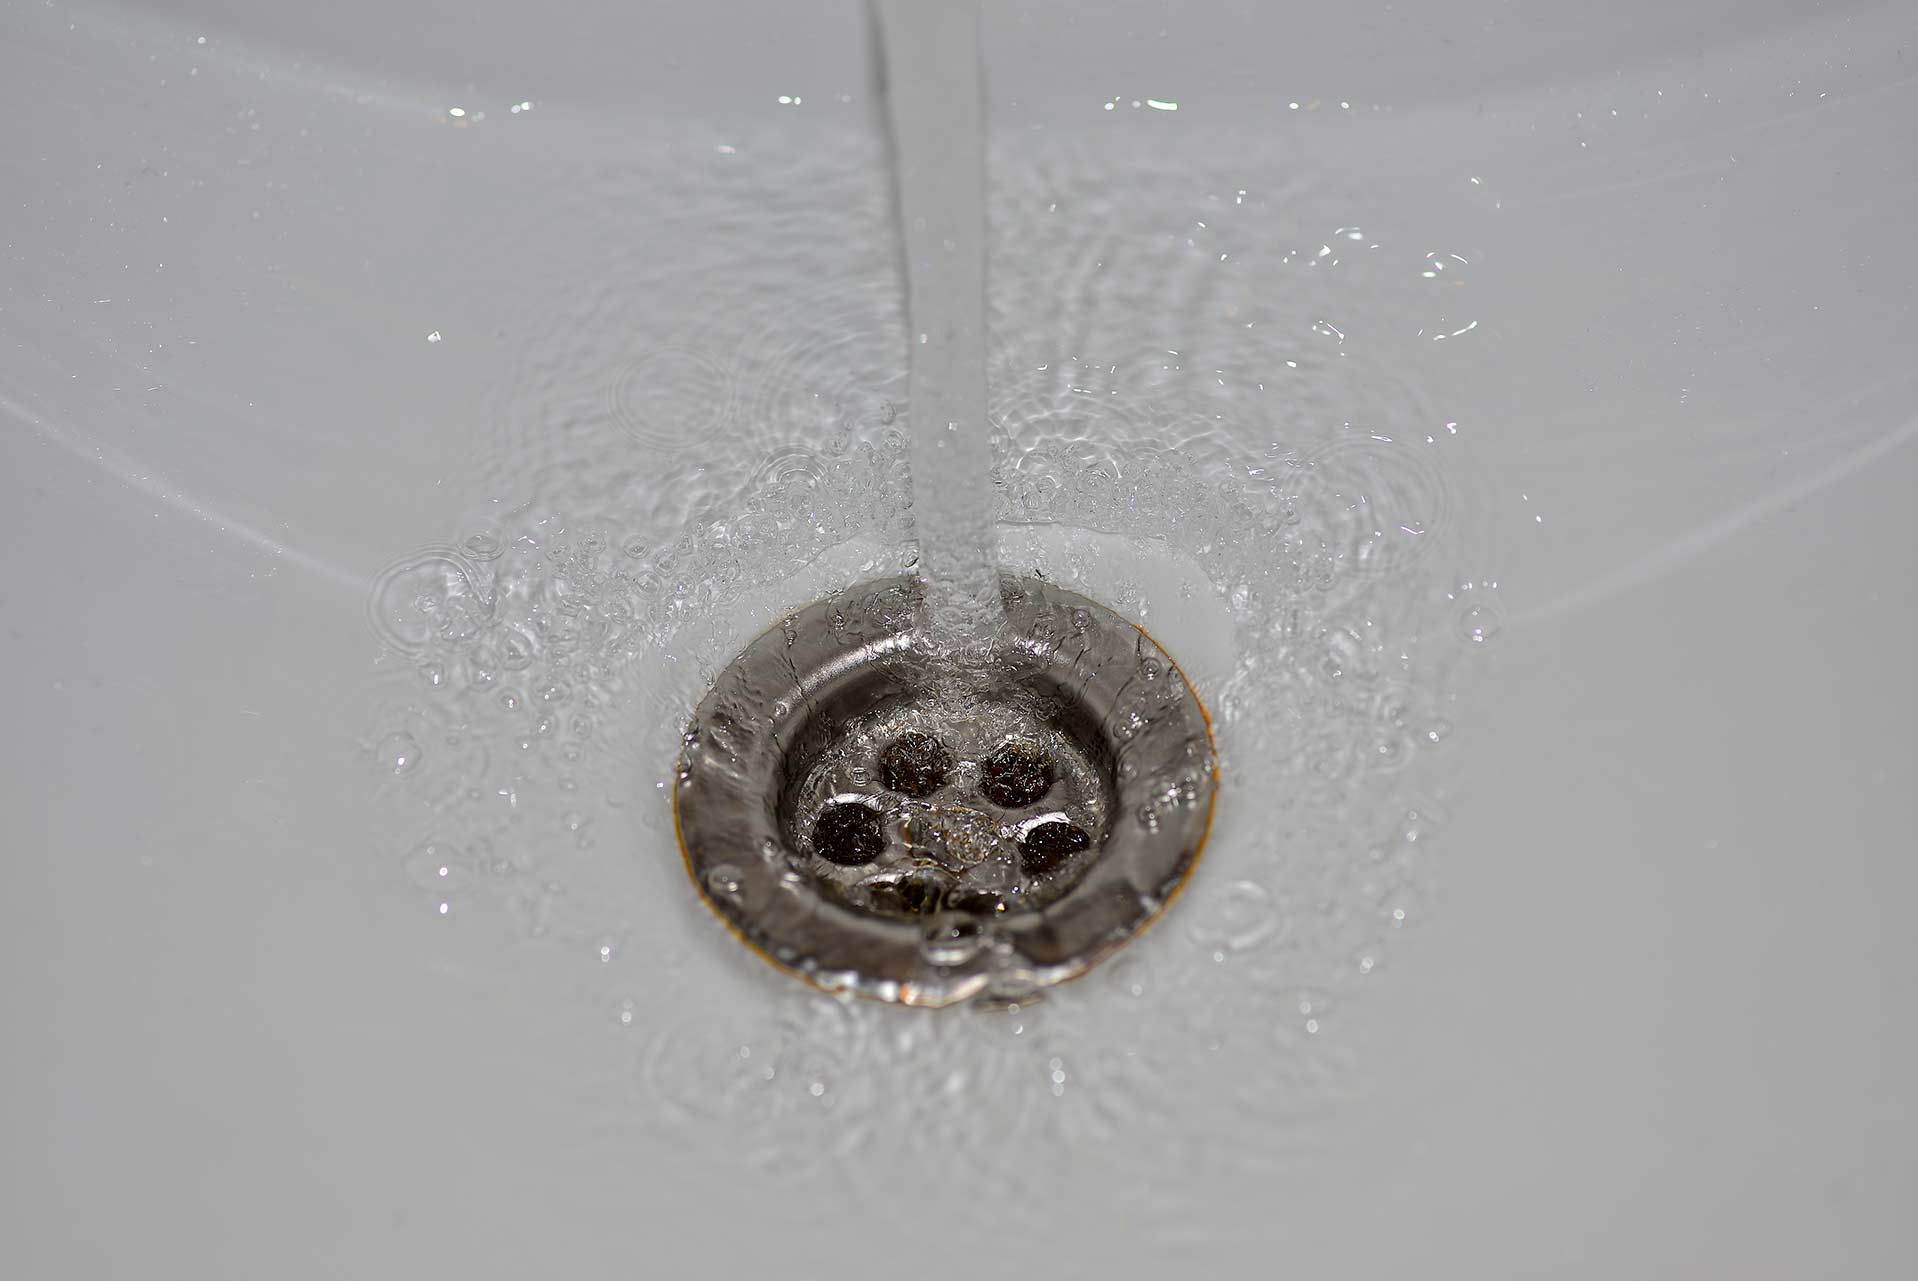 A2B Drains provides services to unblock blocked sinks and drains for properties in Littlehampton.